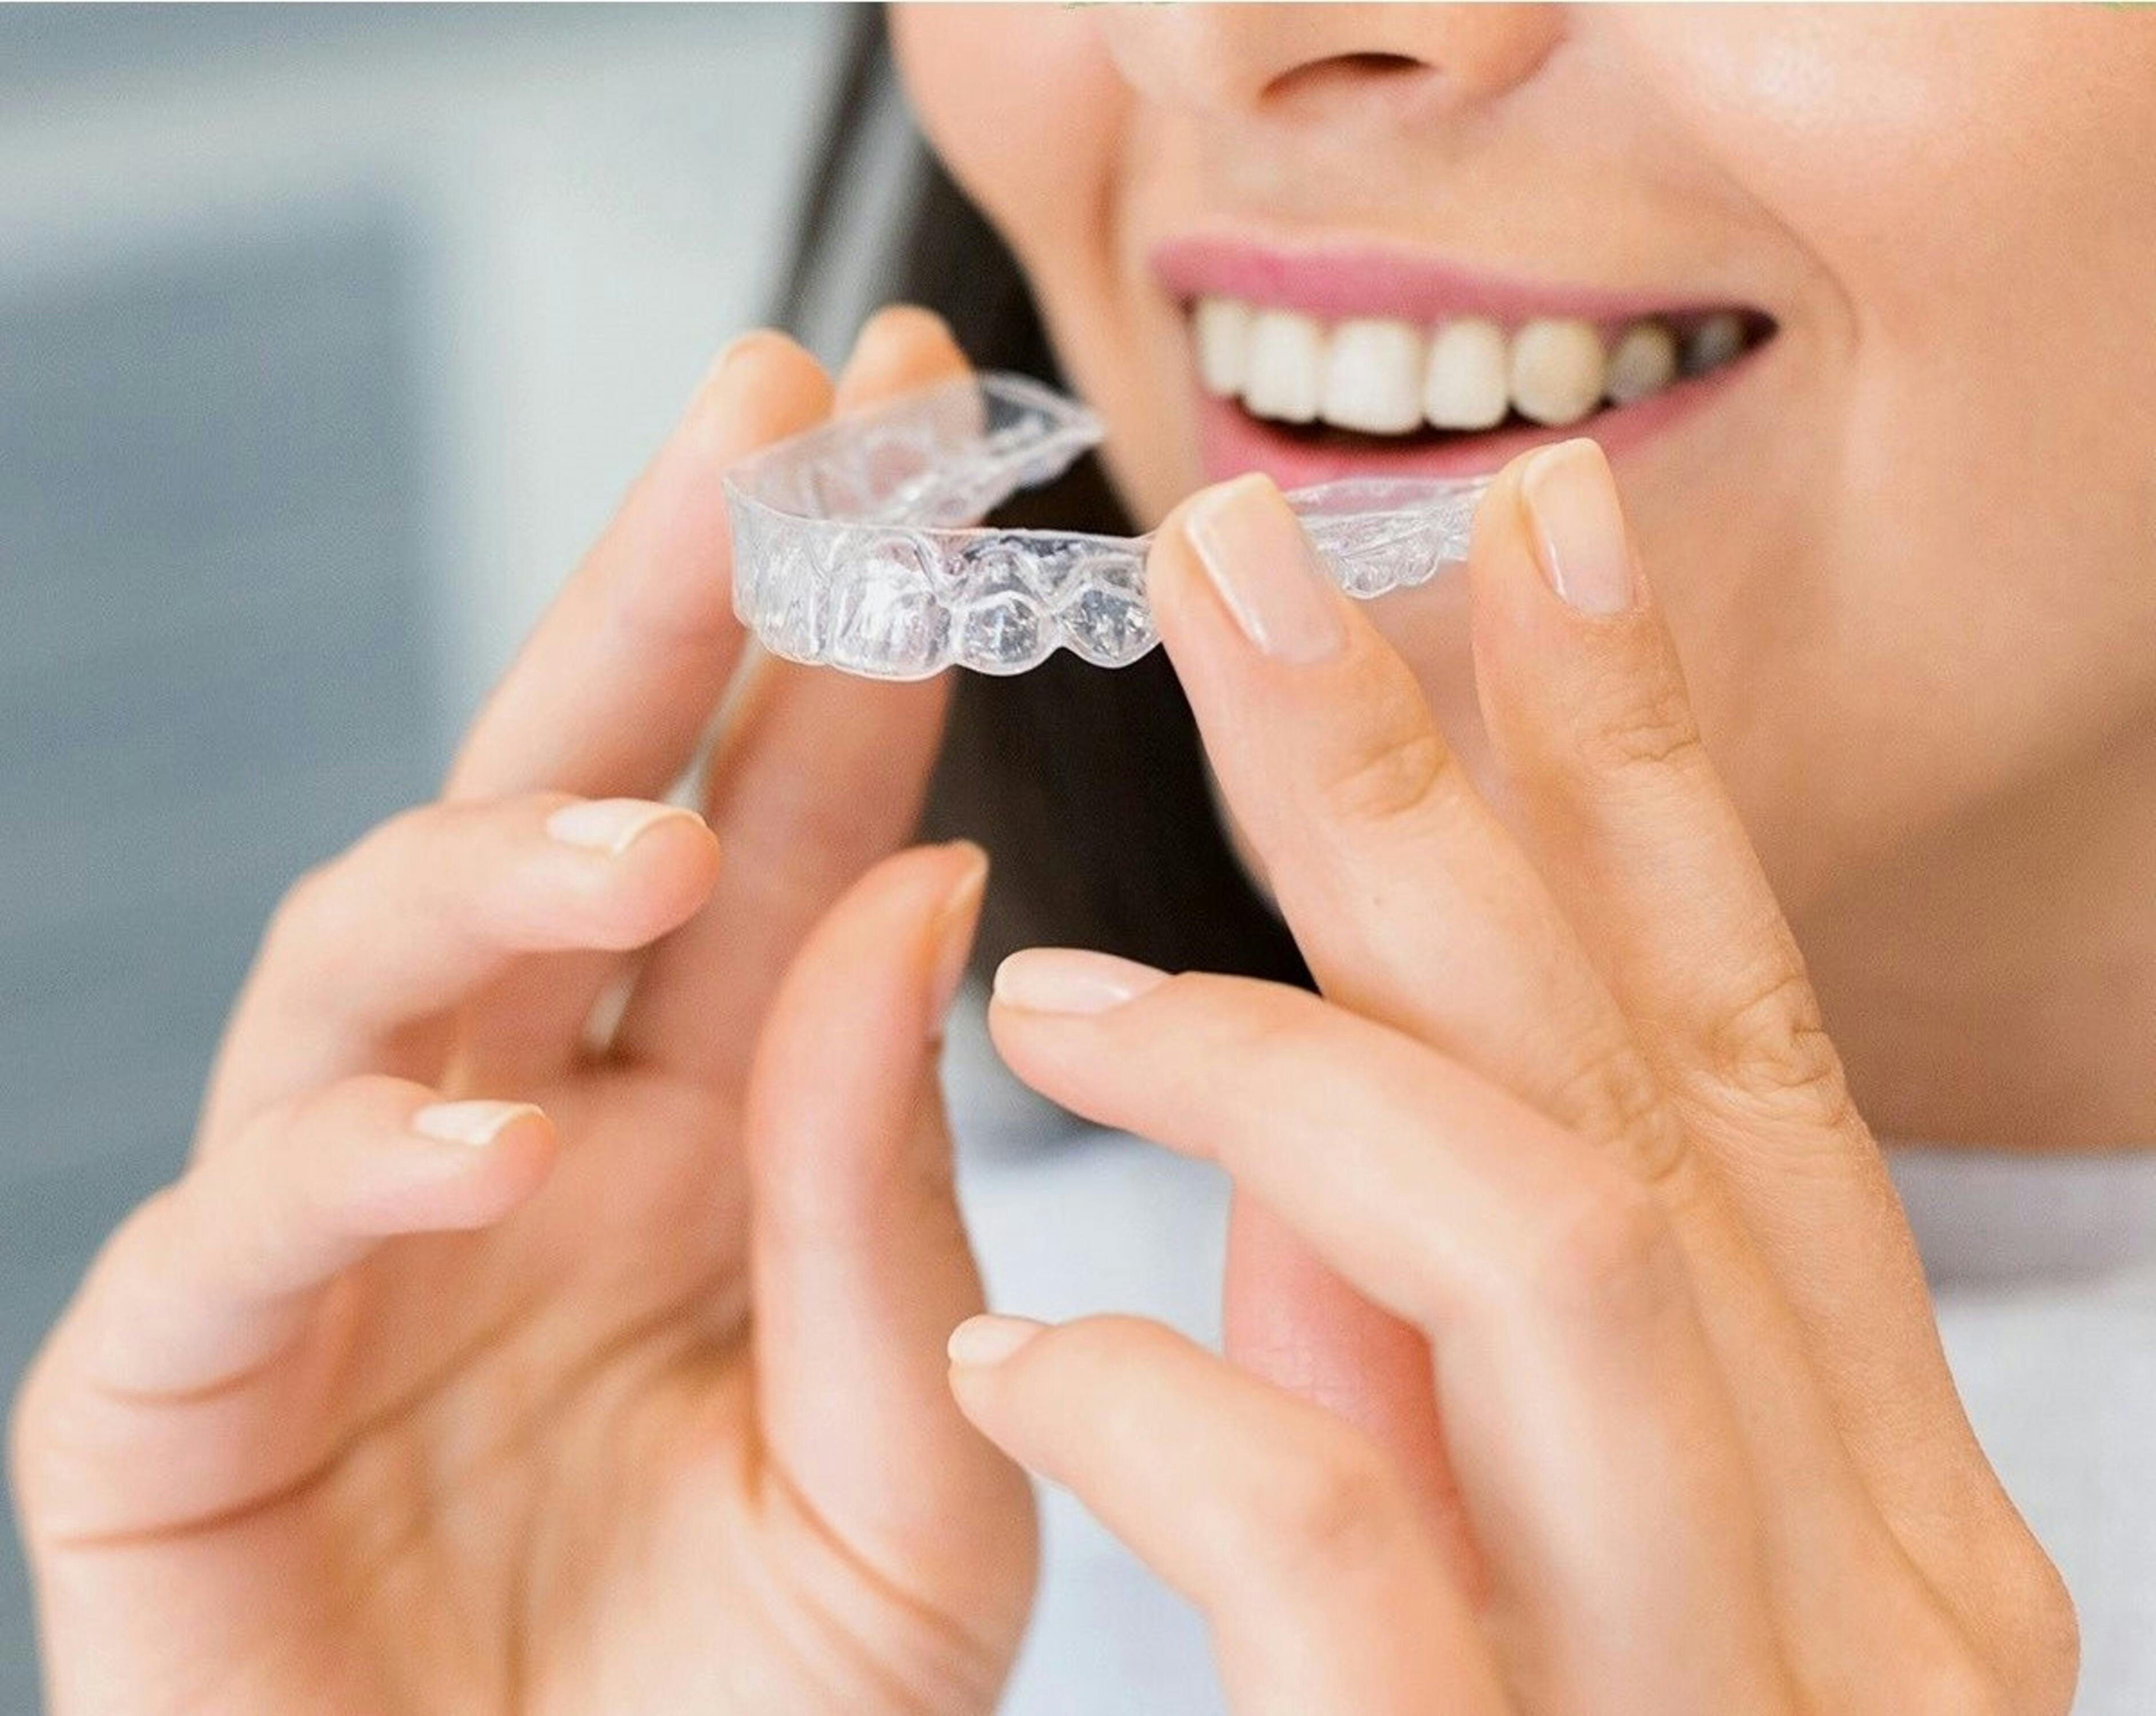 What are the Crucial Benefits of Invisalign